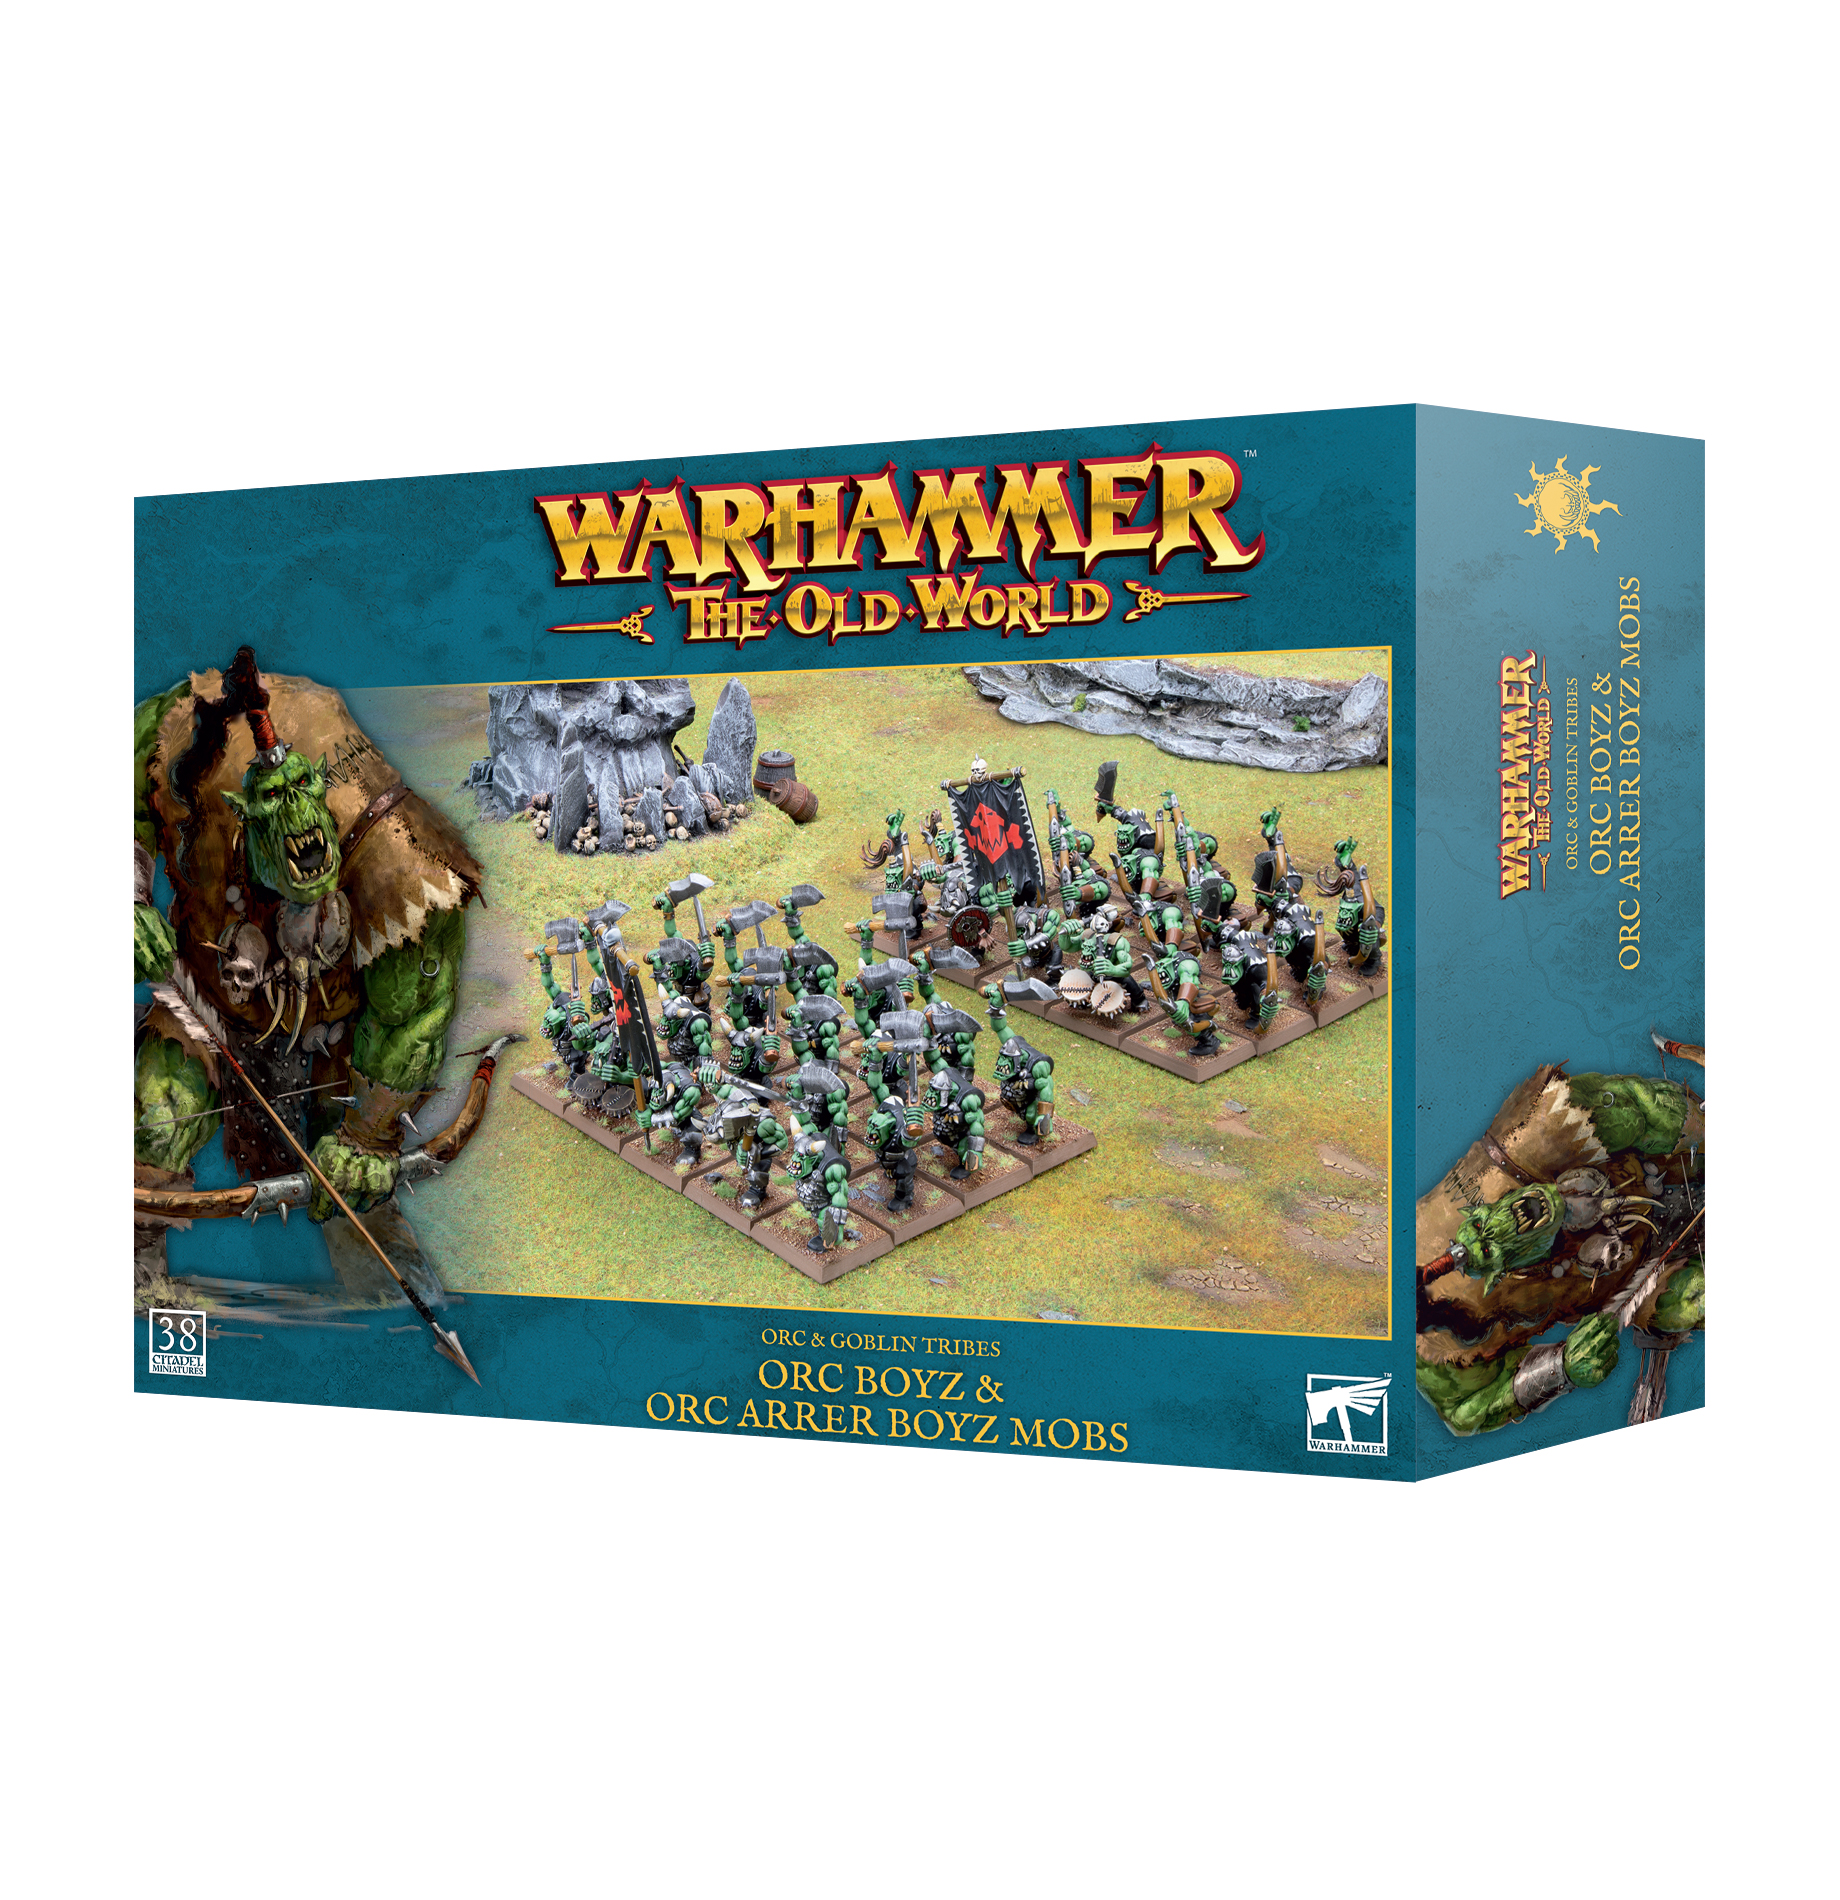 Warhammer: The Old World: Orc & Goblin Tribes: Orc Boyz and Orc Arrer Boyz Mobs (May 4th) 